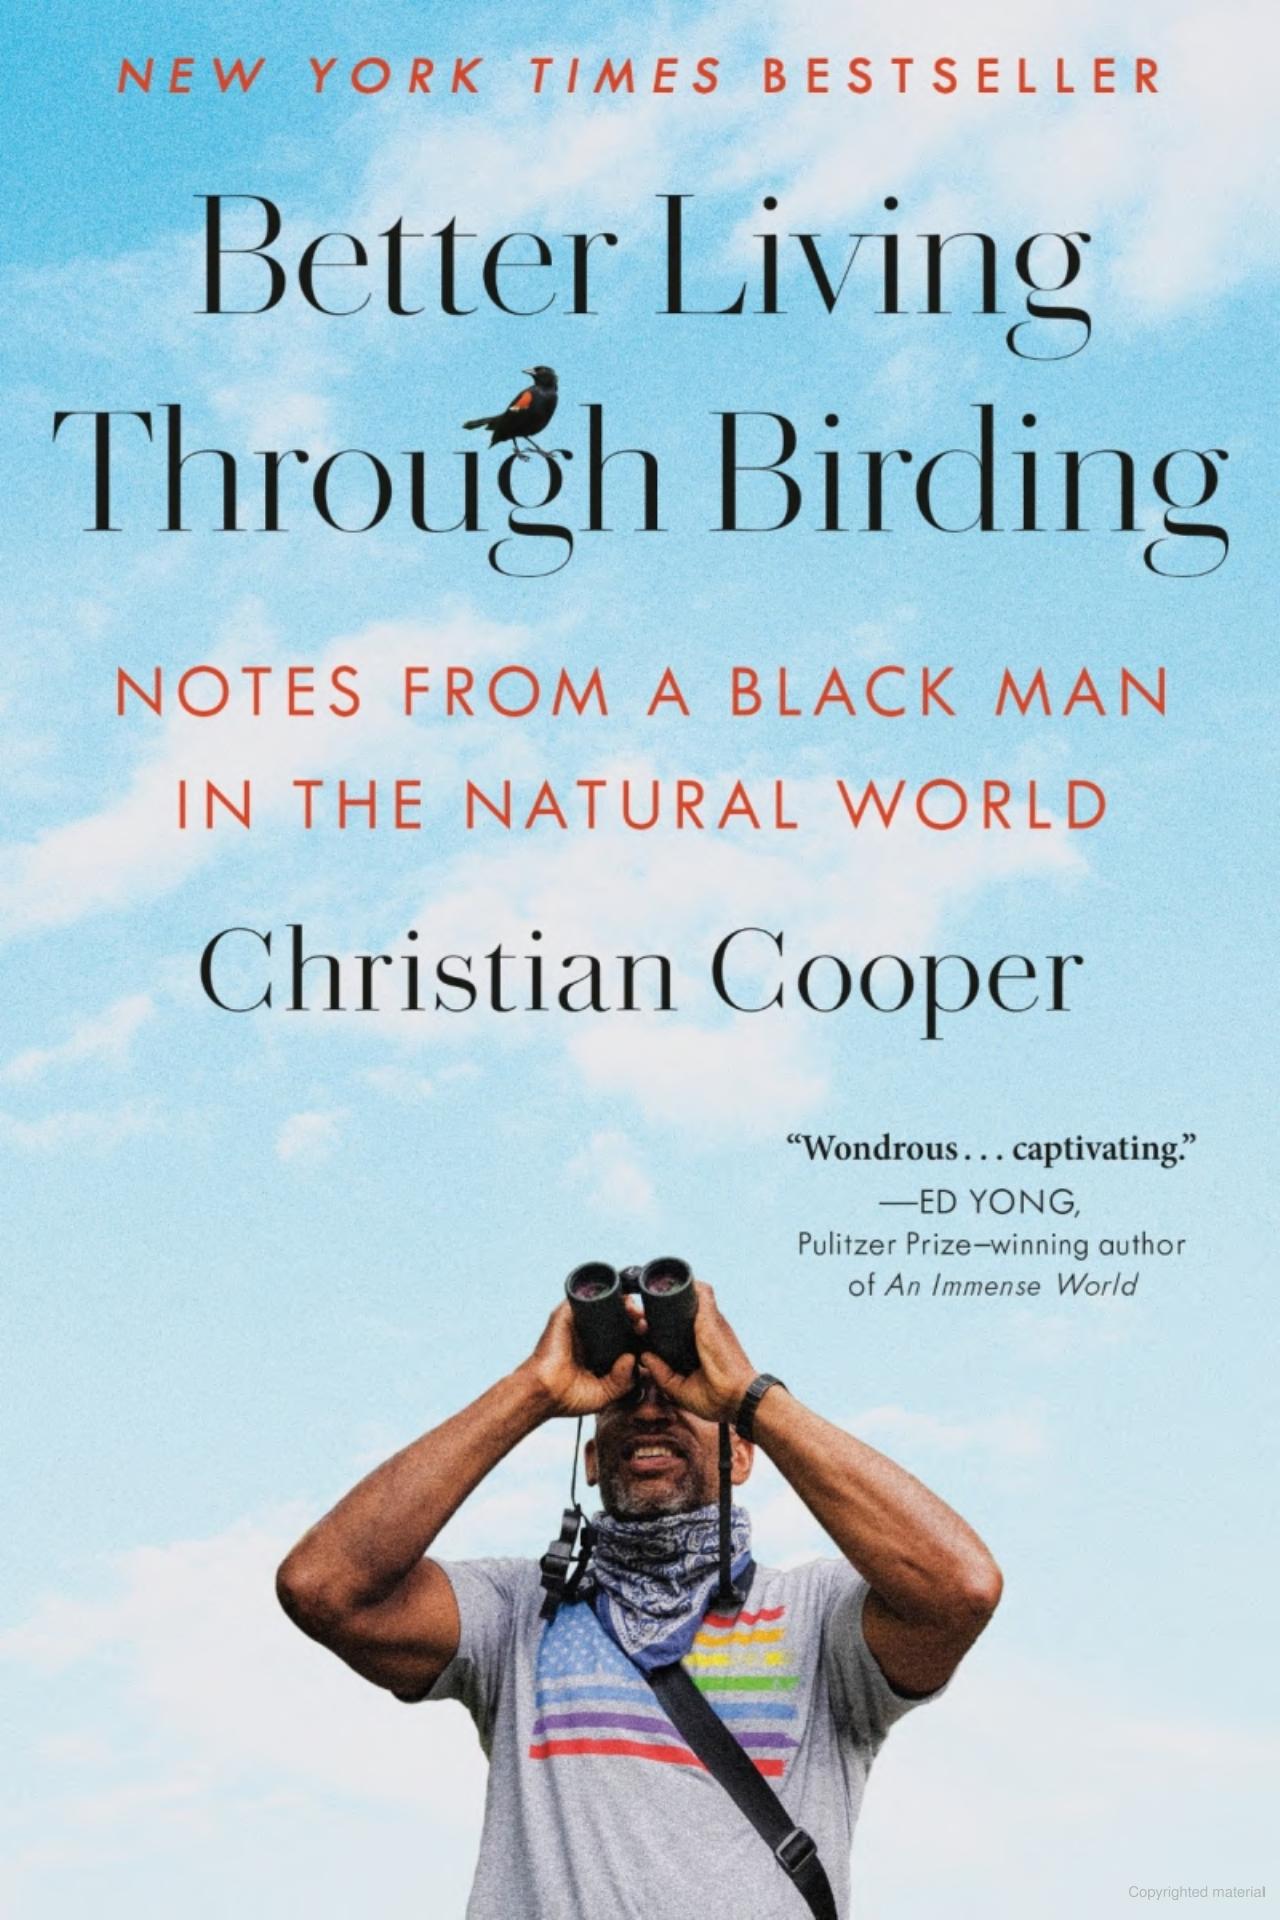 Image of Book Cover featuring a man looking through binoculars into the sky. 